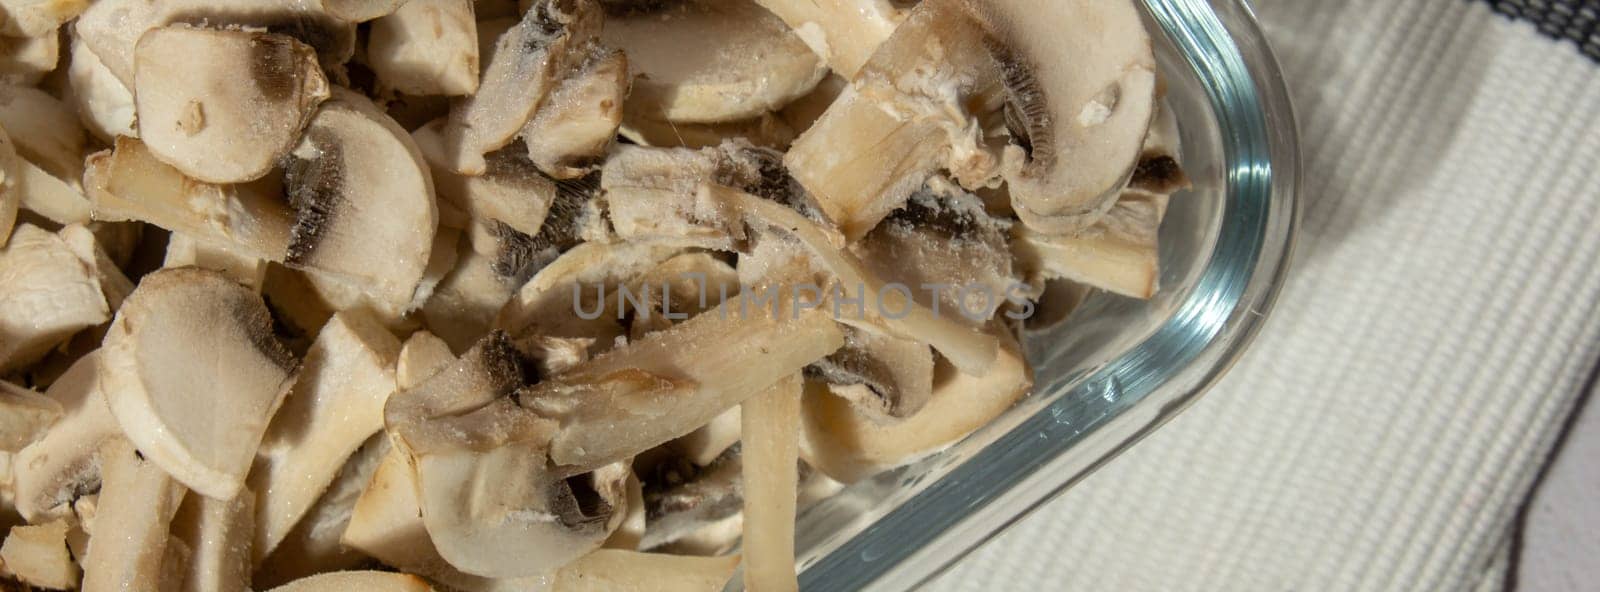 Frozen food sliced mushrooms champignon homemade. Harvesting concept. Stocking up vegetables for winter storage Healthy food, Cooking ingredients